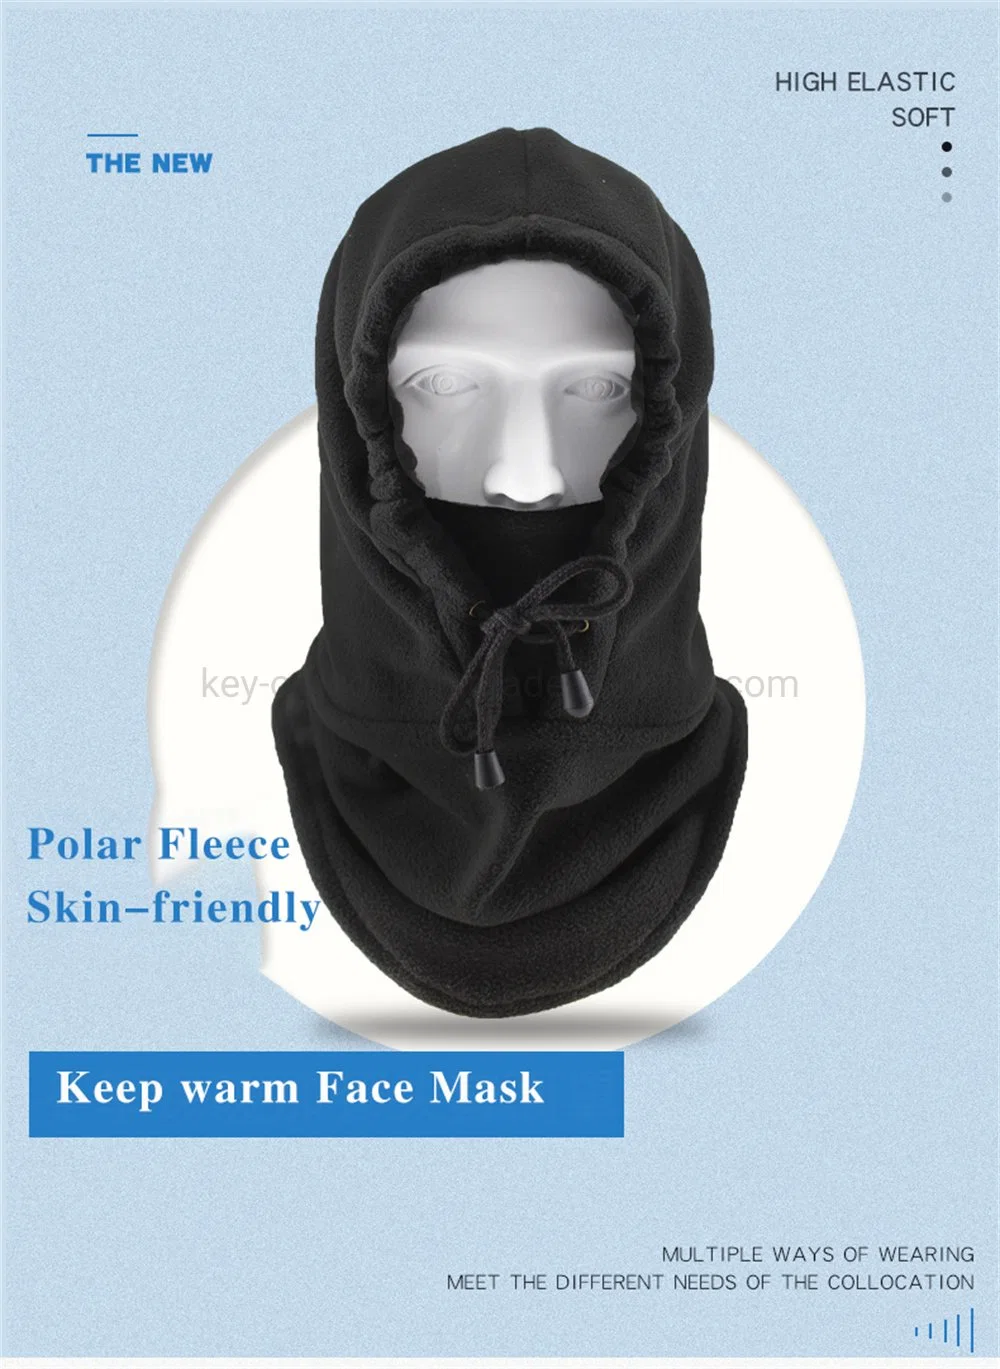 Fleece Hood Windproof Face Ski Bandanas Ultimate Thermal Retention Moisture Wicking with Performance Soft Riding Mask Head Face Cover Balaclava